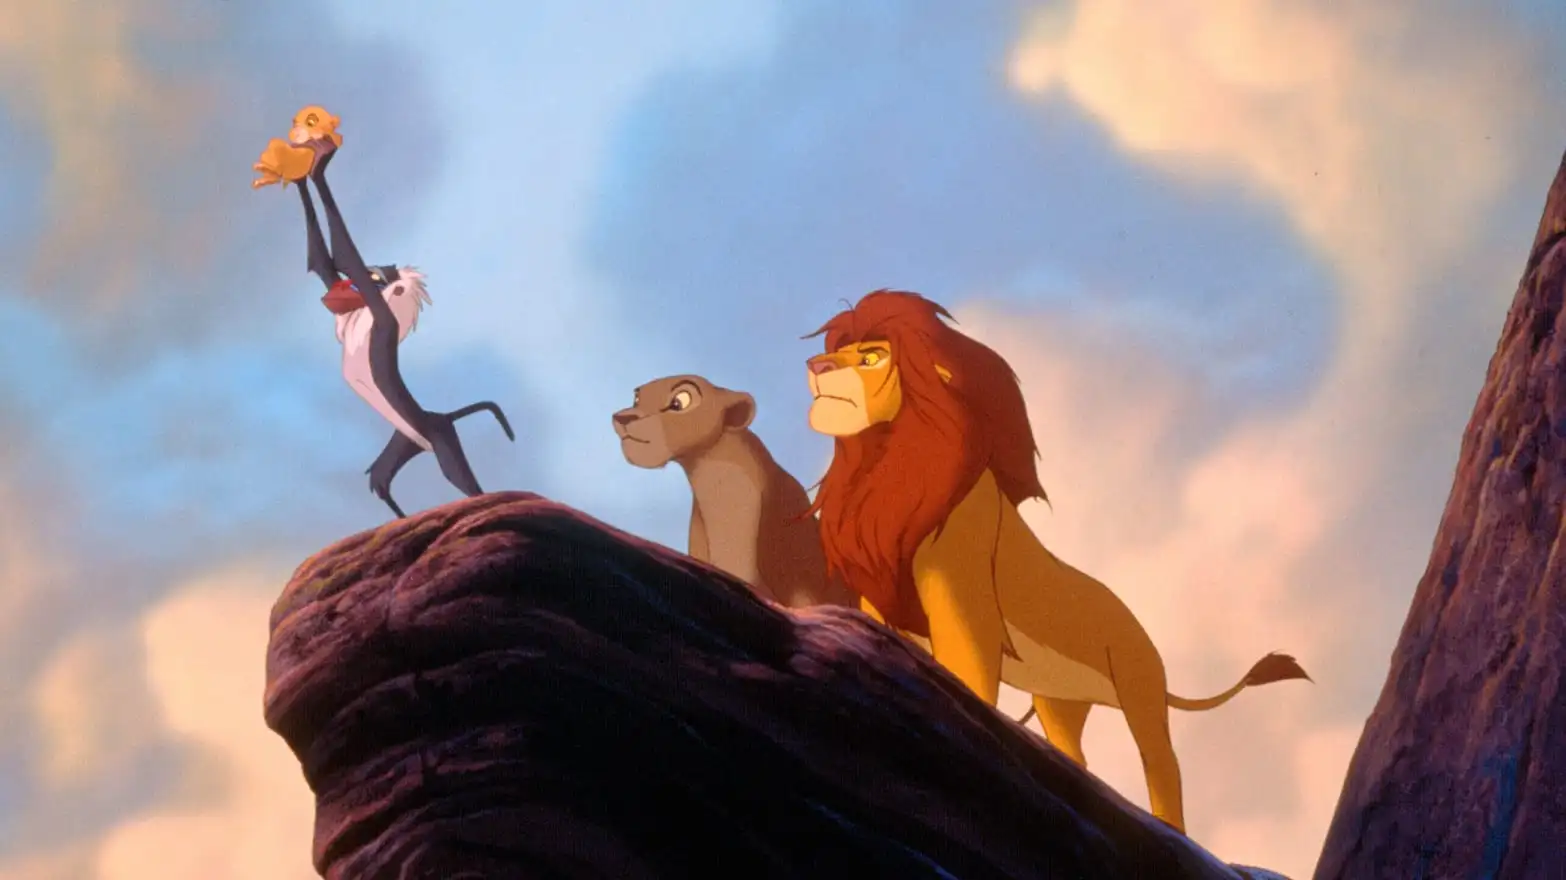 Disney 100th Anniversary Theatrical Rerelease Dates Set for The Lion King & 7 More